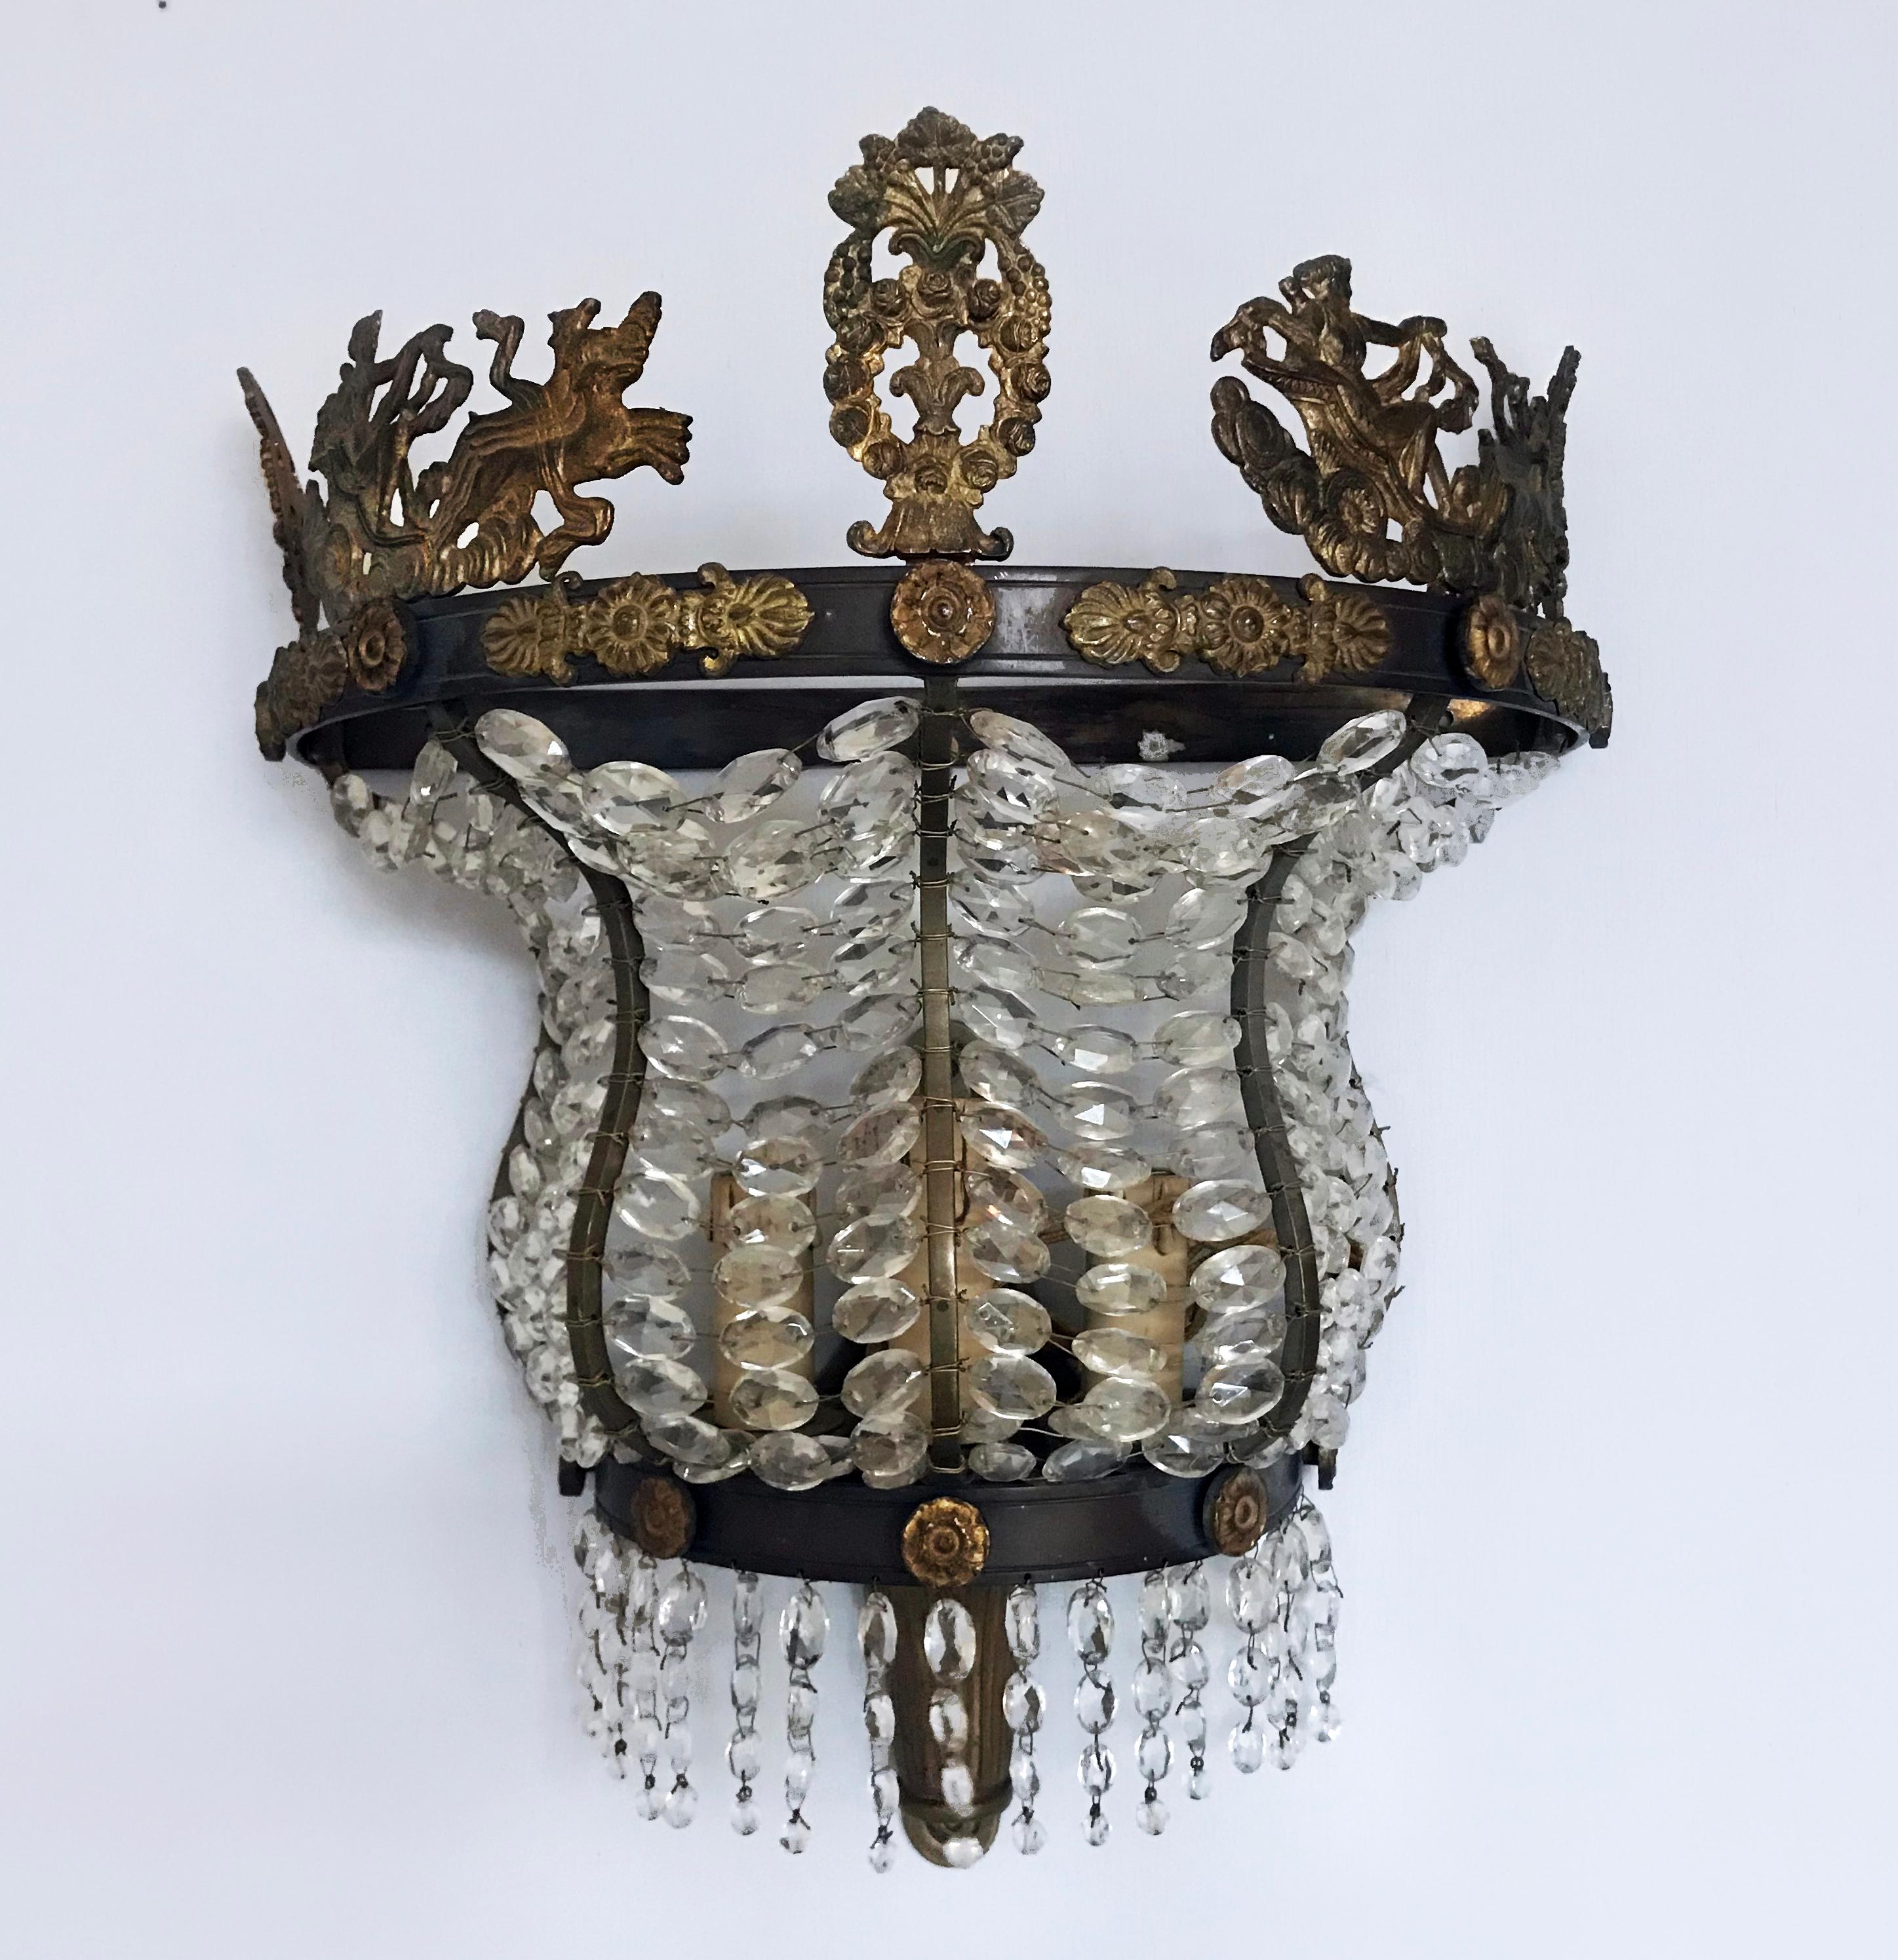 A highly unusual pair of French bronze-framed and ormolu-mounted Empire style wall lights. The well cast mounts depicting classical maidens in chariots centred by a floral garland with grapes. The whole enclosed with cut crystal beads.